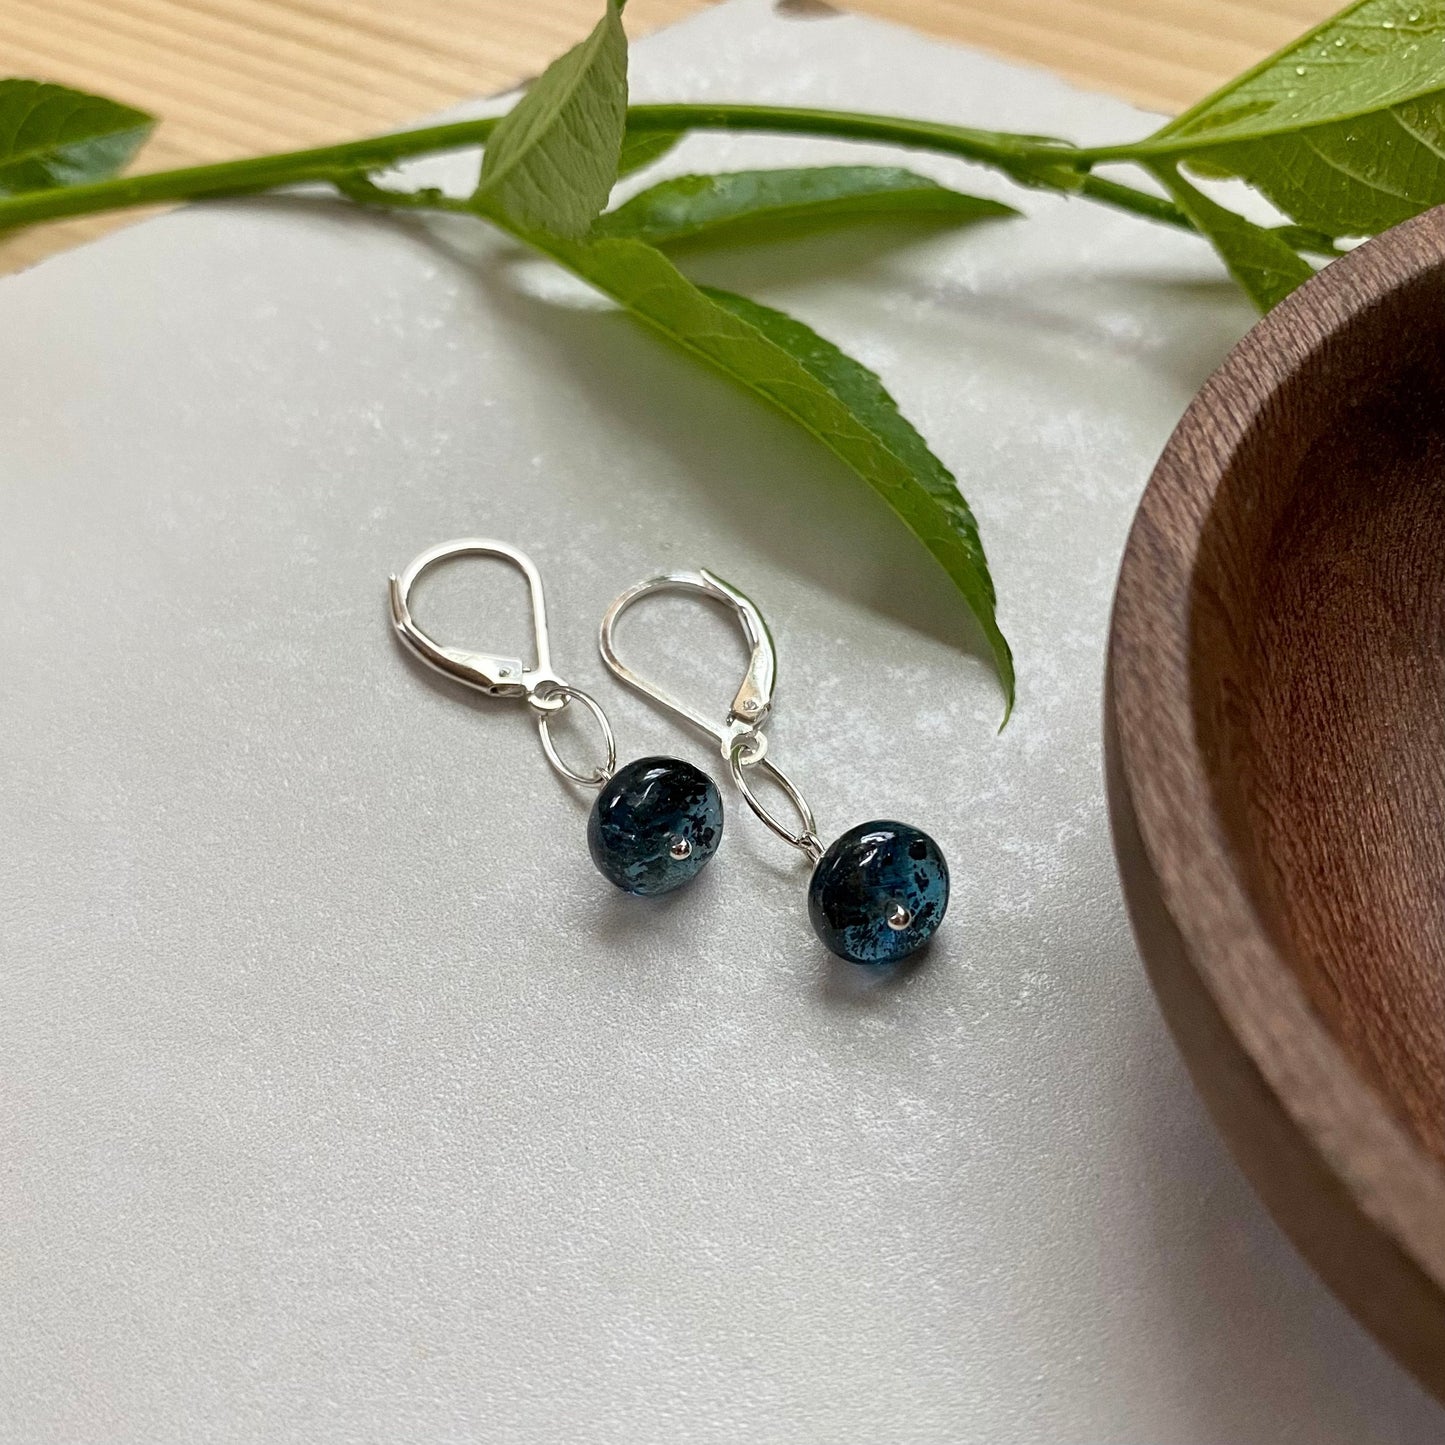 Kyanite Earrings, Blue Gemstone Sterling Silver Everyday Simple Elegant Small Drop Dangle Leverback or French Ear Wires, Oxidized or Bright